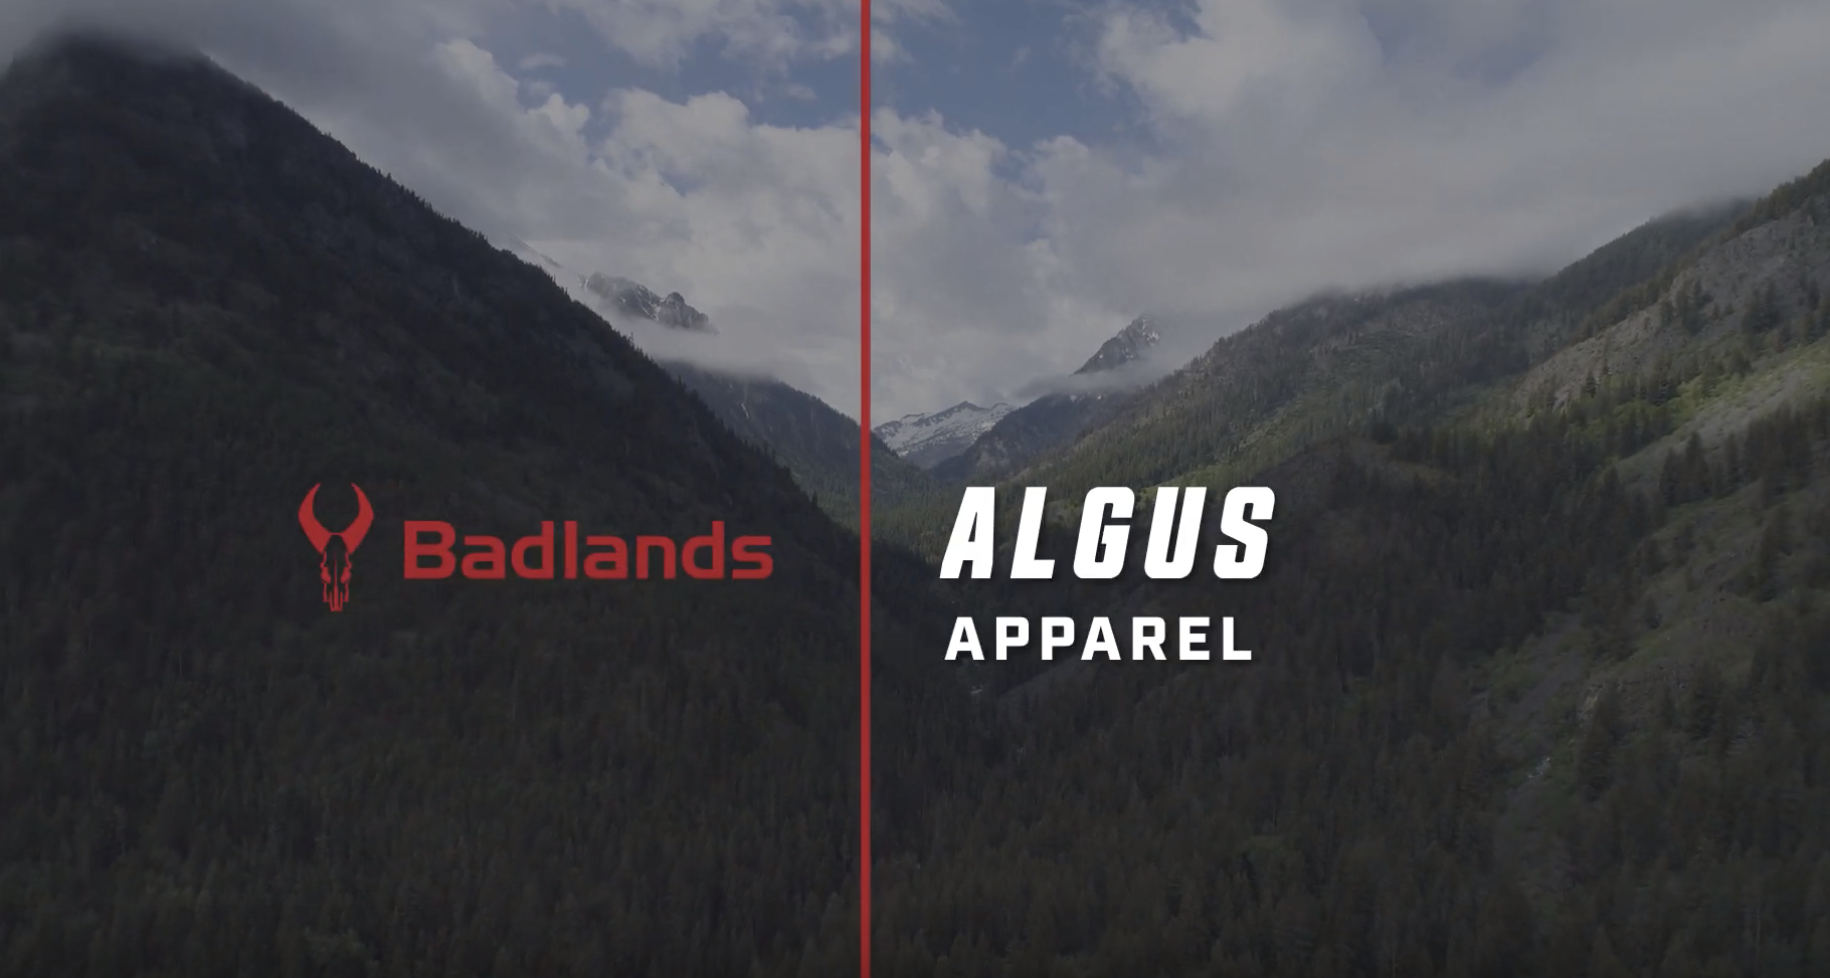 Learn more about the Algus Apparel